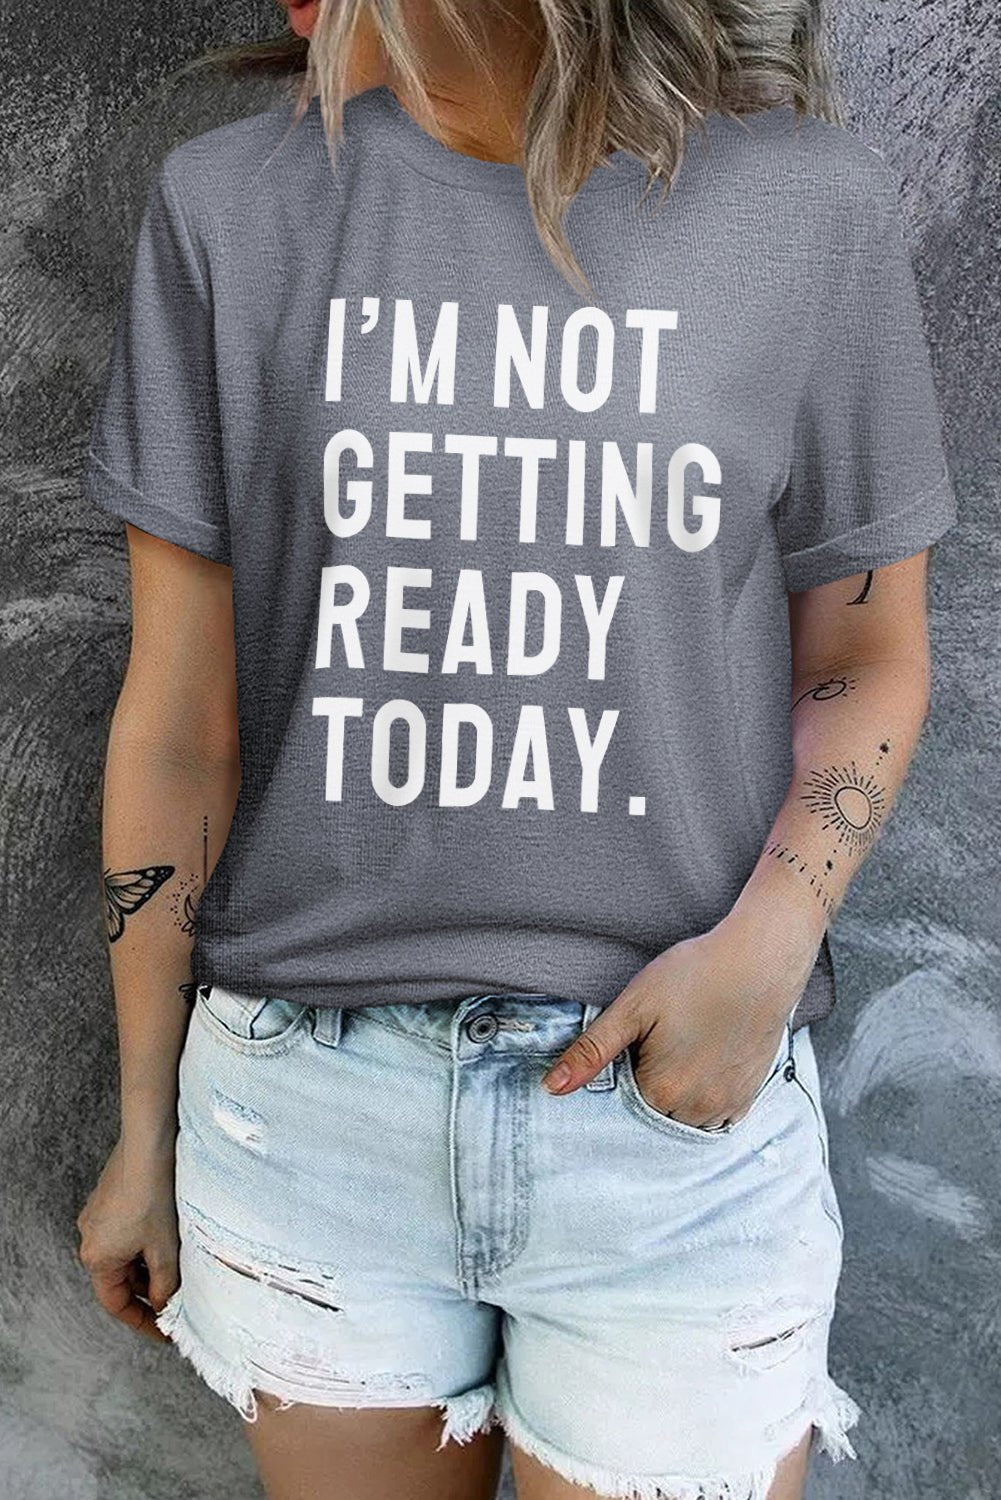 Beauty in Simplicity - Embrace your Inner Rebel with our "I'm Not Getting Ready Today" Graphic Tee. Indulge in Ultimate Comfort and Style with this Timeless Garment that will Remind You of Your Beauty and Power Every Day! - Guy Christopher